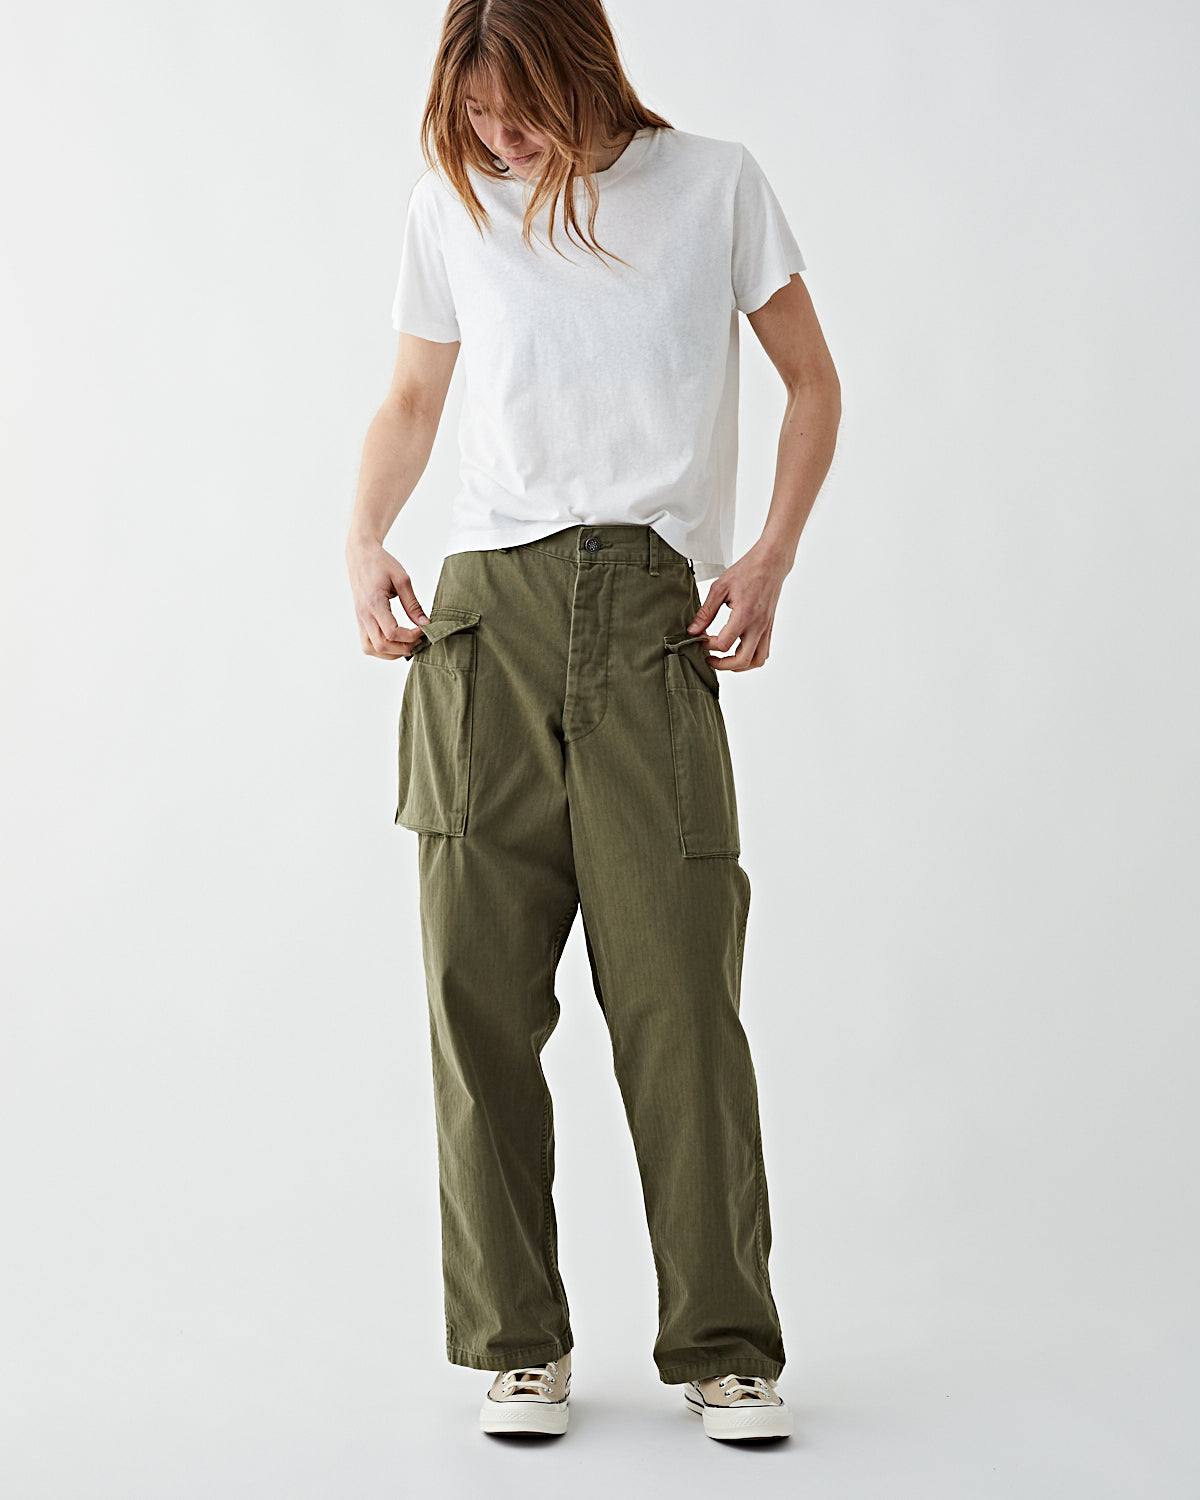 Buy tbase mens Olive Cotton Printed Cargo Pant for Men online India